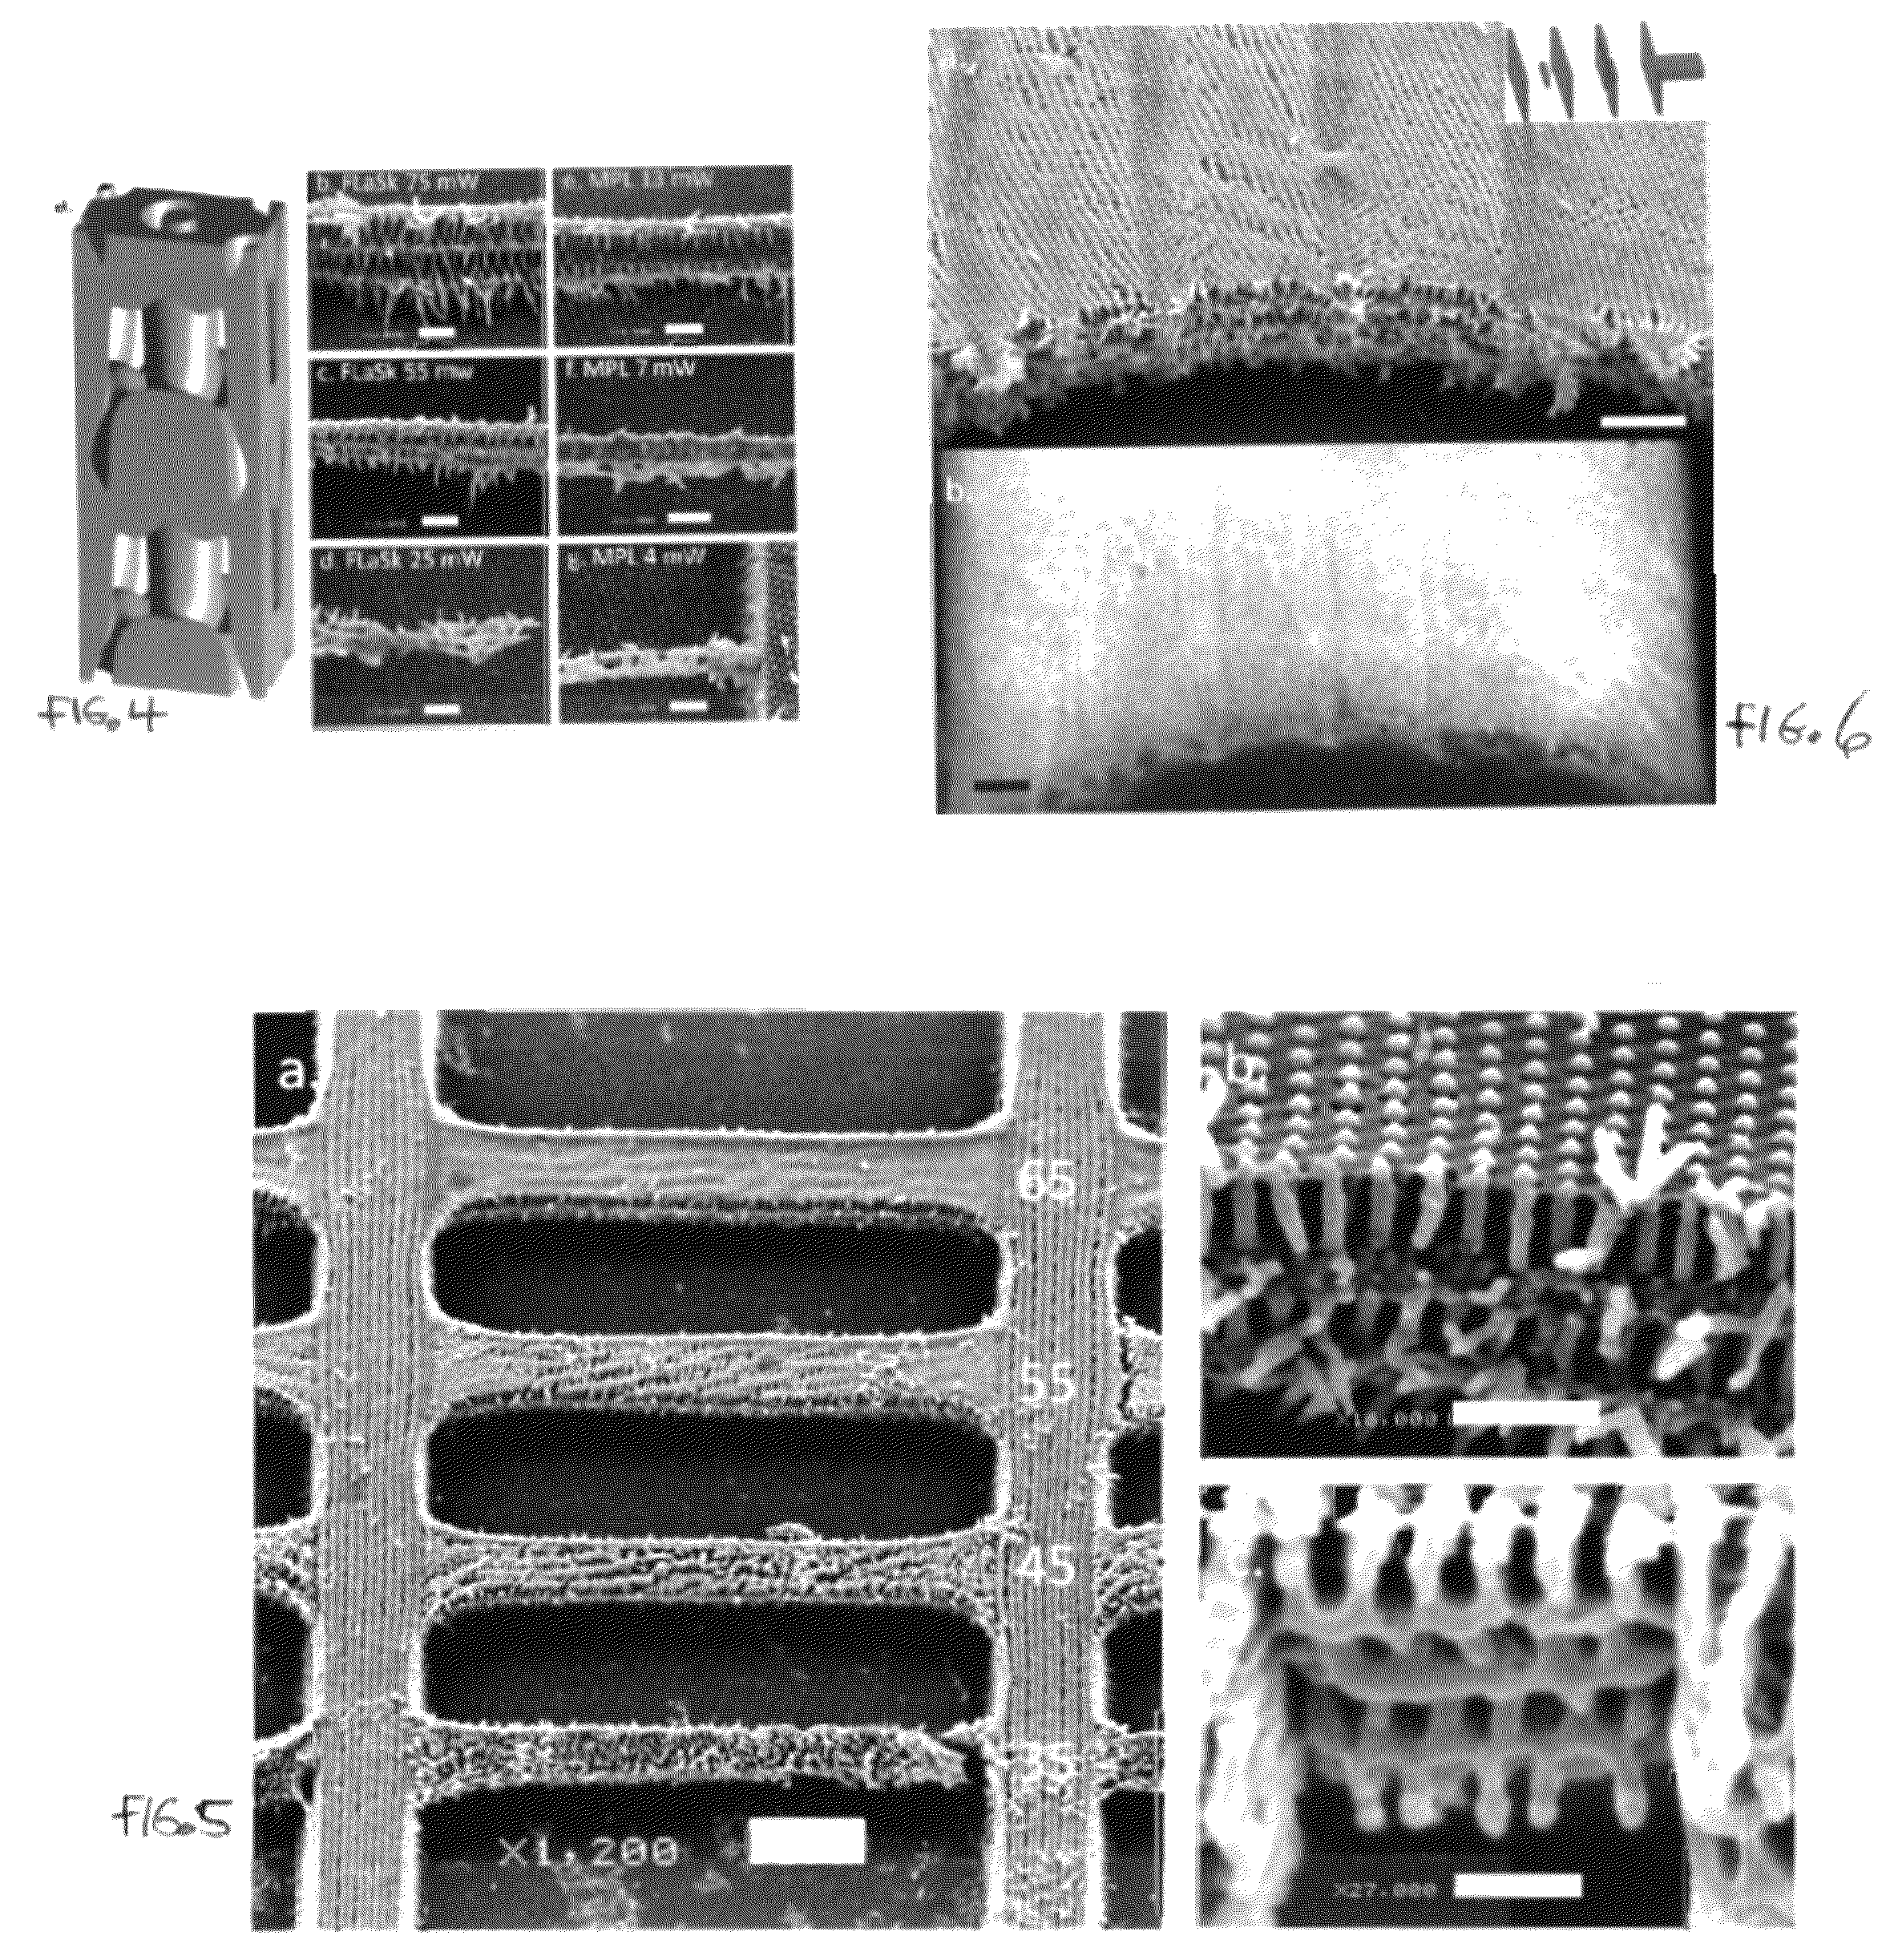 Hybrid lithographic method for fabricating complex multidimensional structures